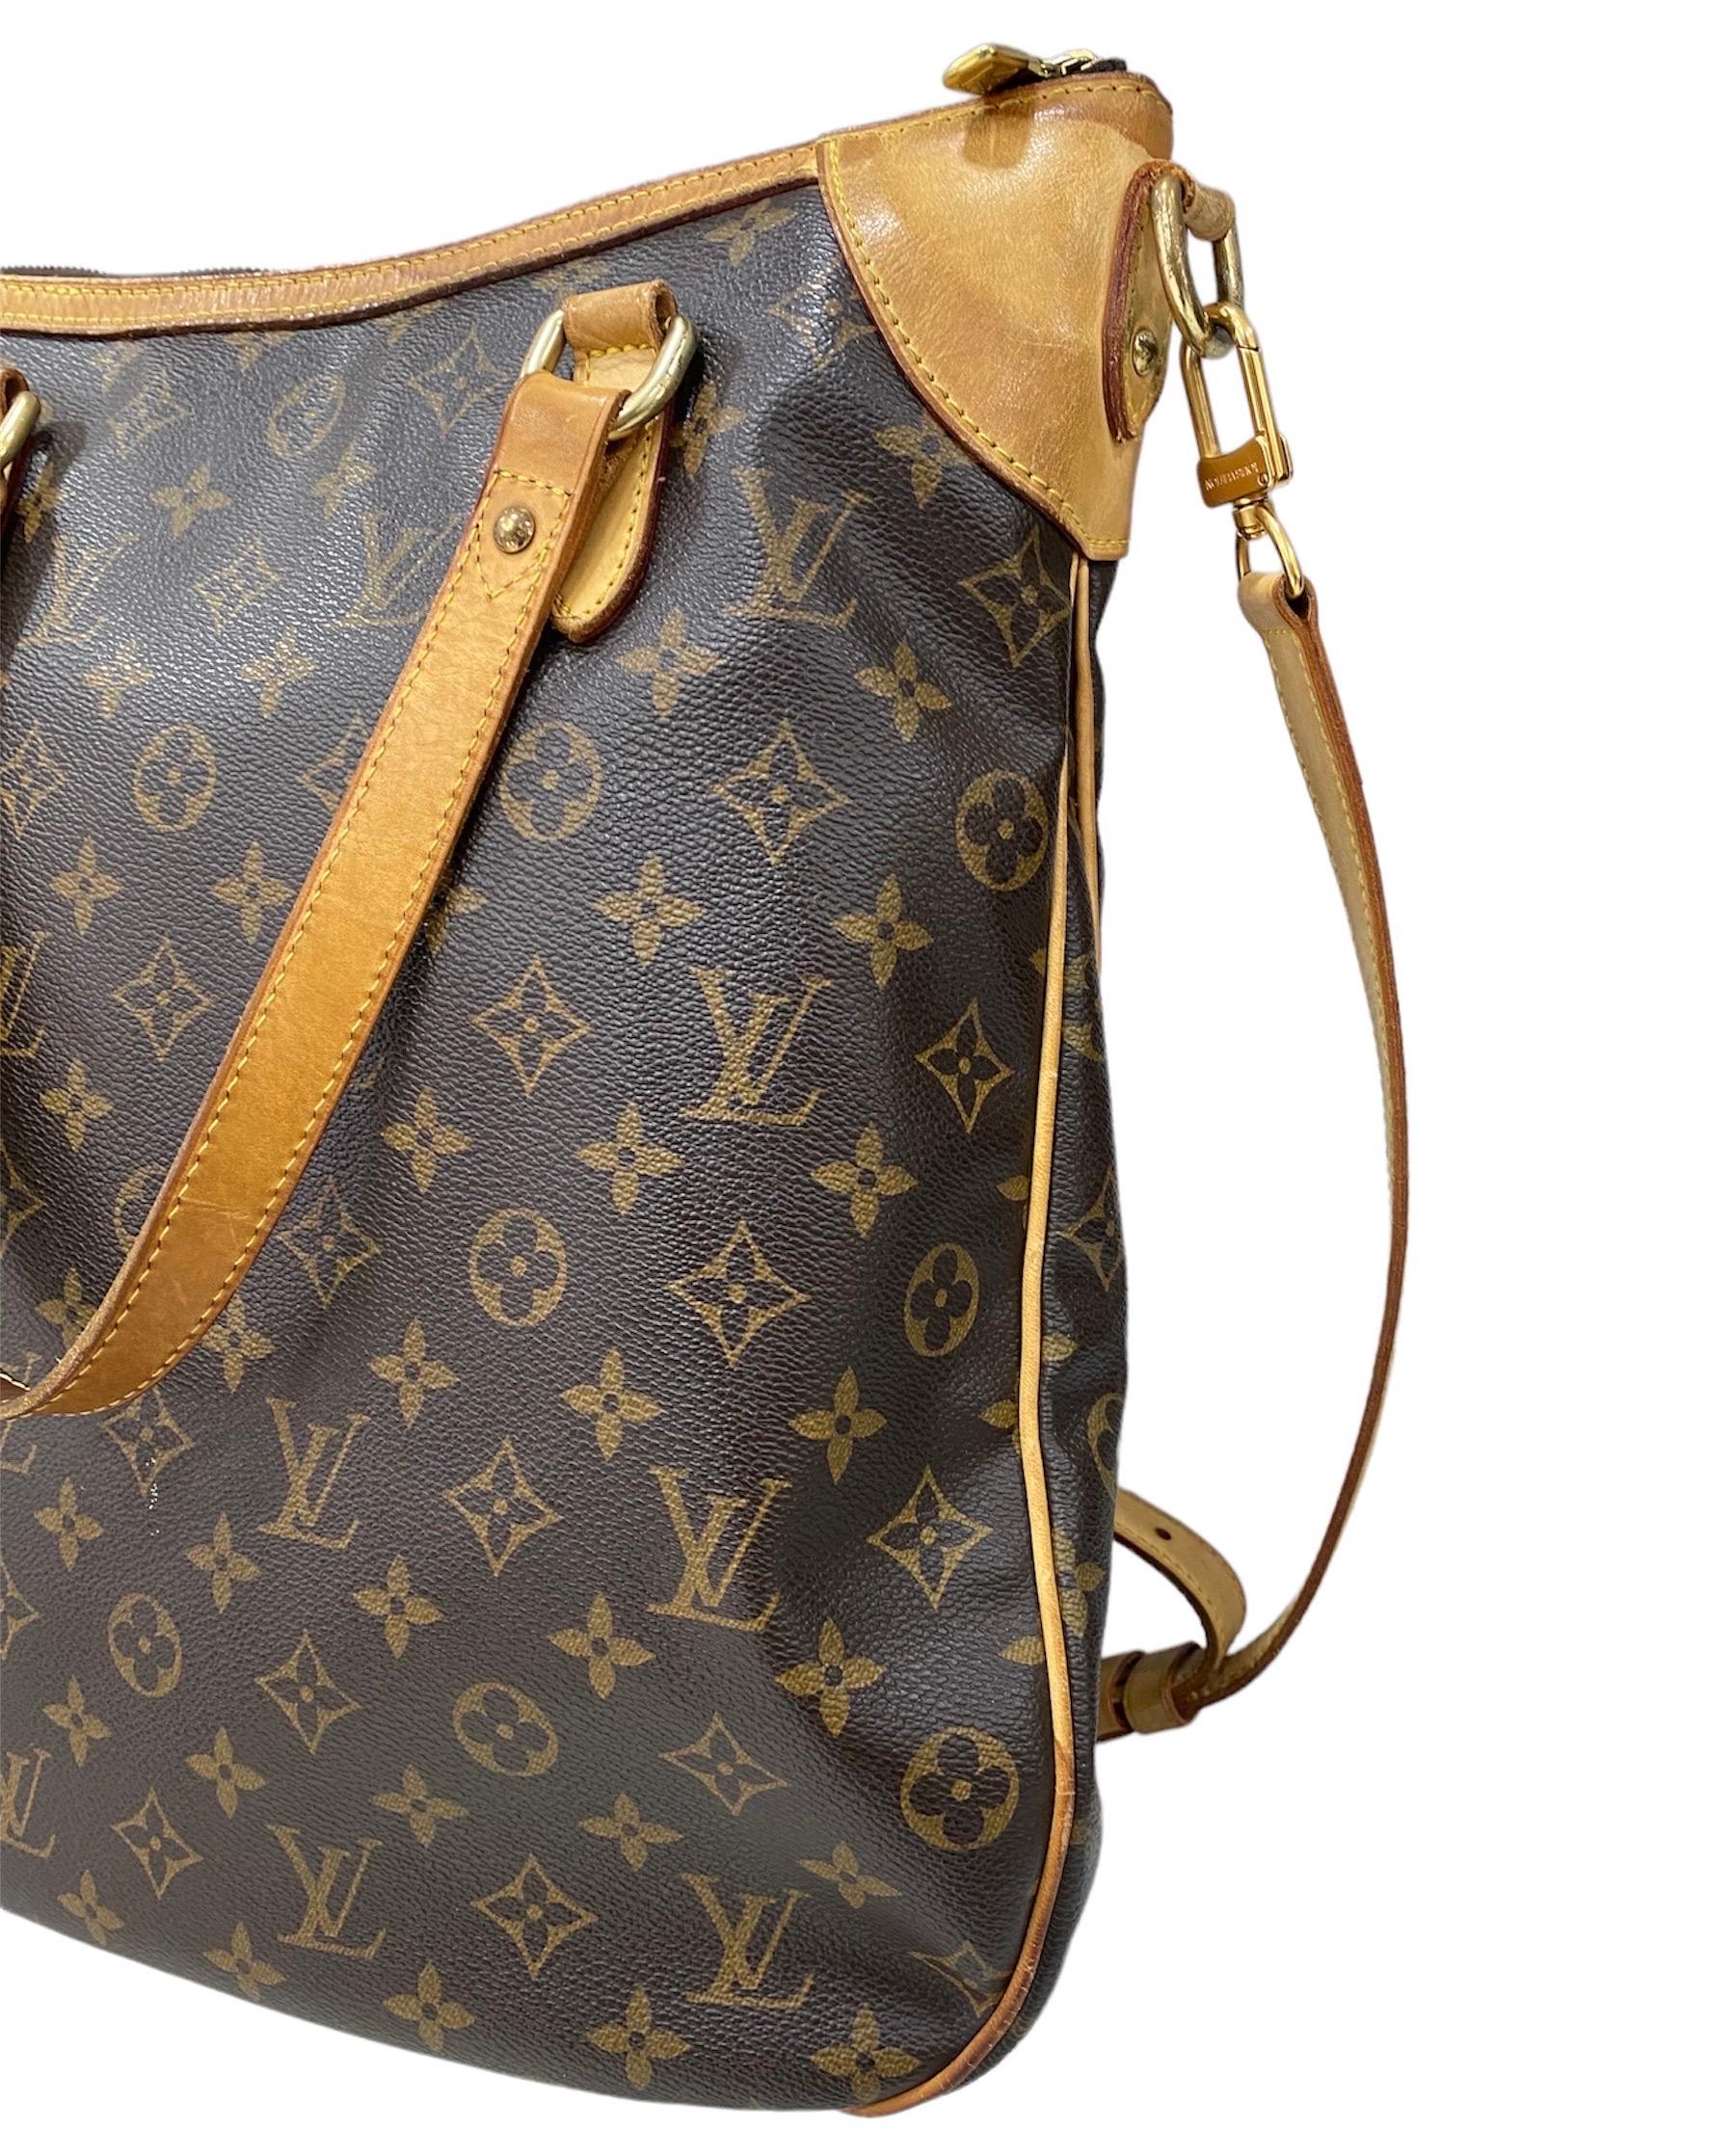 Louis Vuitton bag, Odeon model, GM size, made of brown monogram canvas with cowhide inserts and golden hardware.

Equipped with a zip closure, internally lined in beige canvas, very roomy.

Equipped with double shoulder handle and a removable and